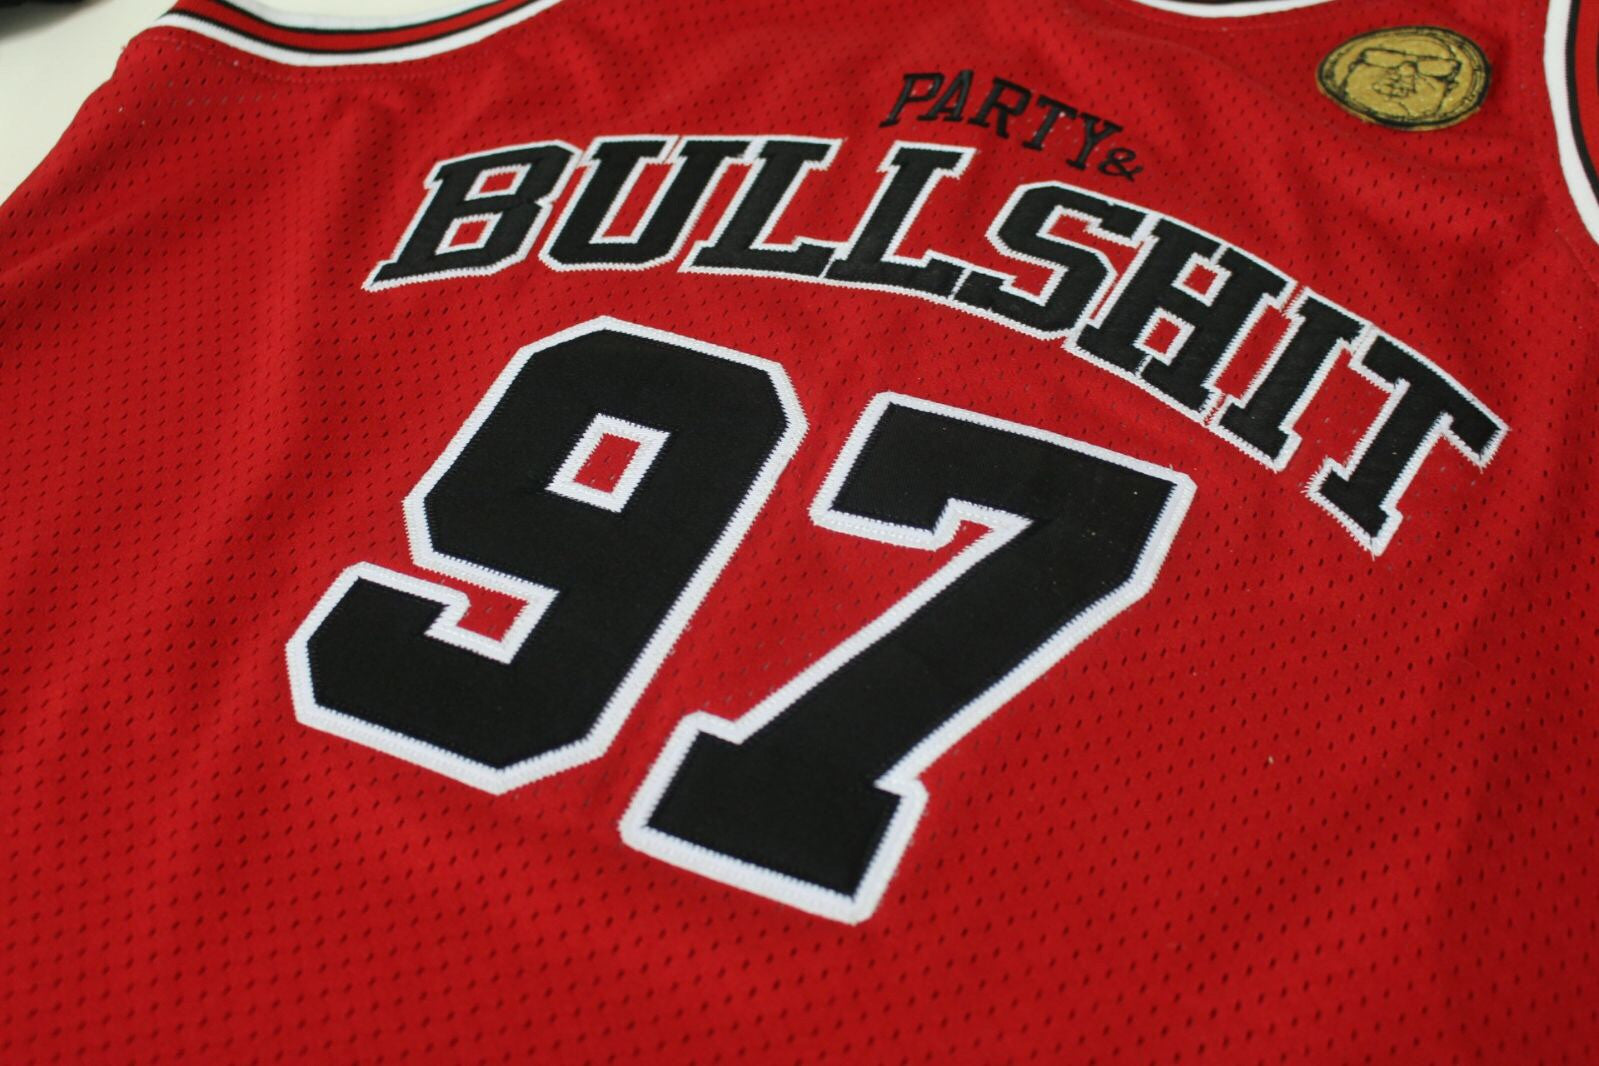 PARTY AND BULLSH*T Red Jersey